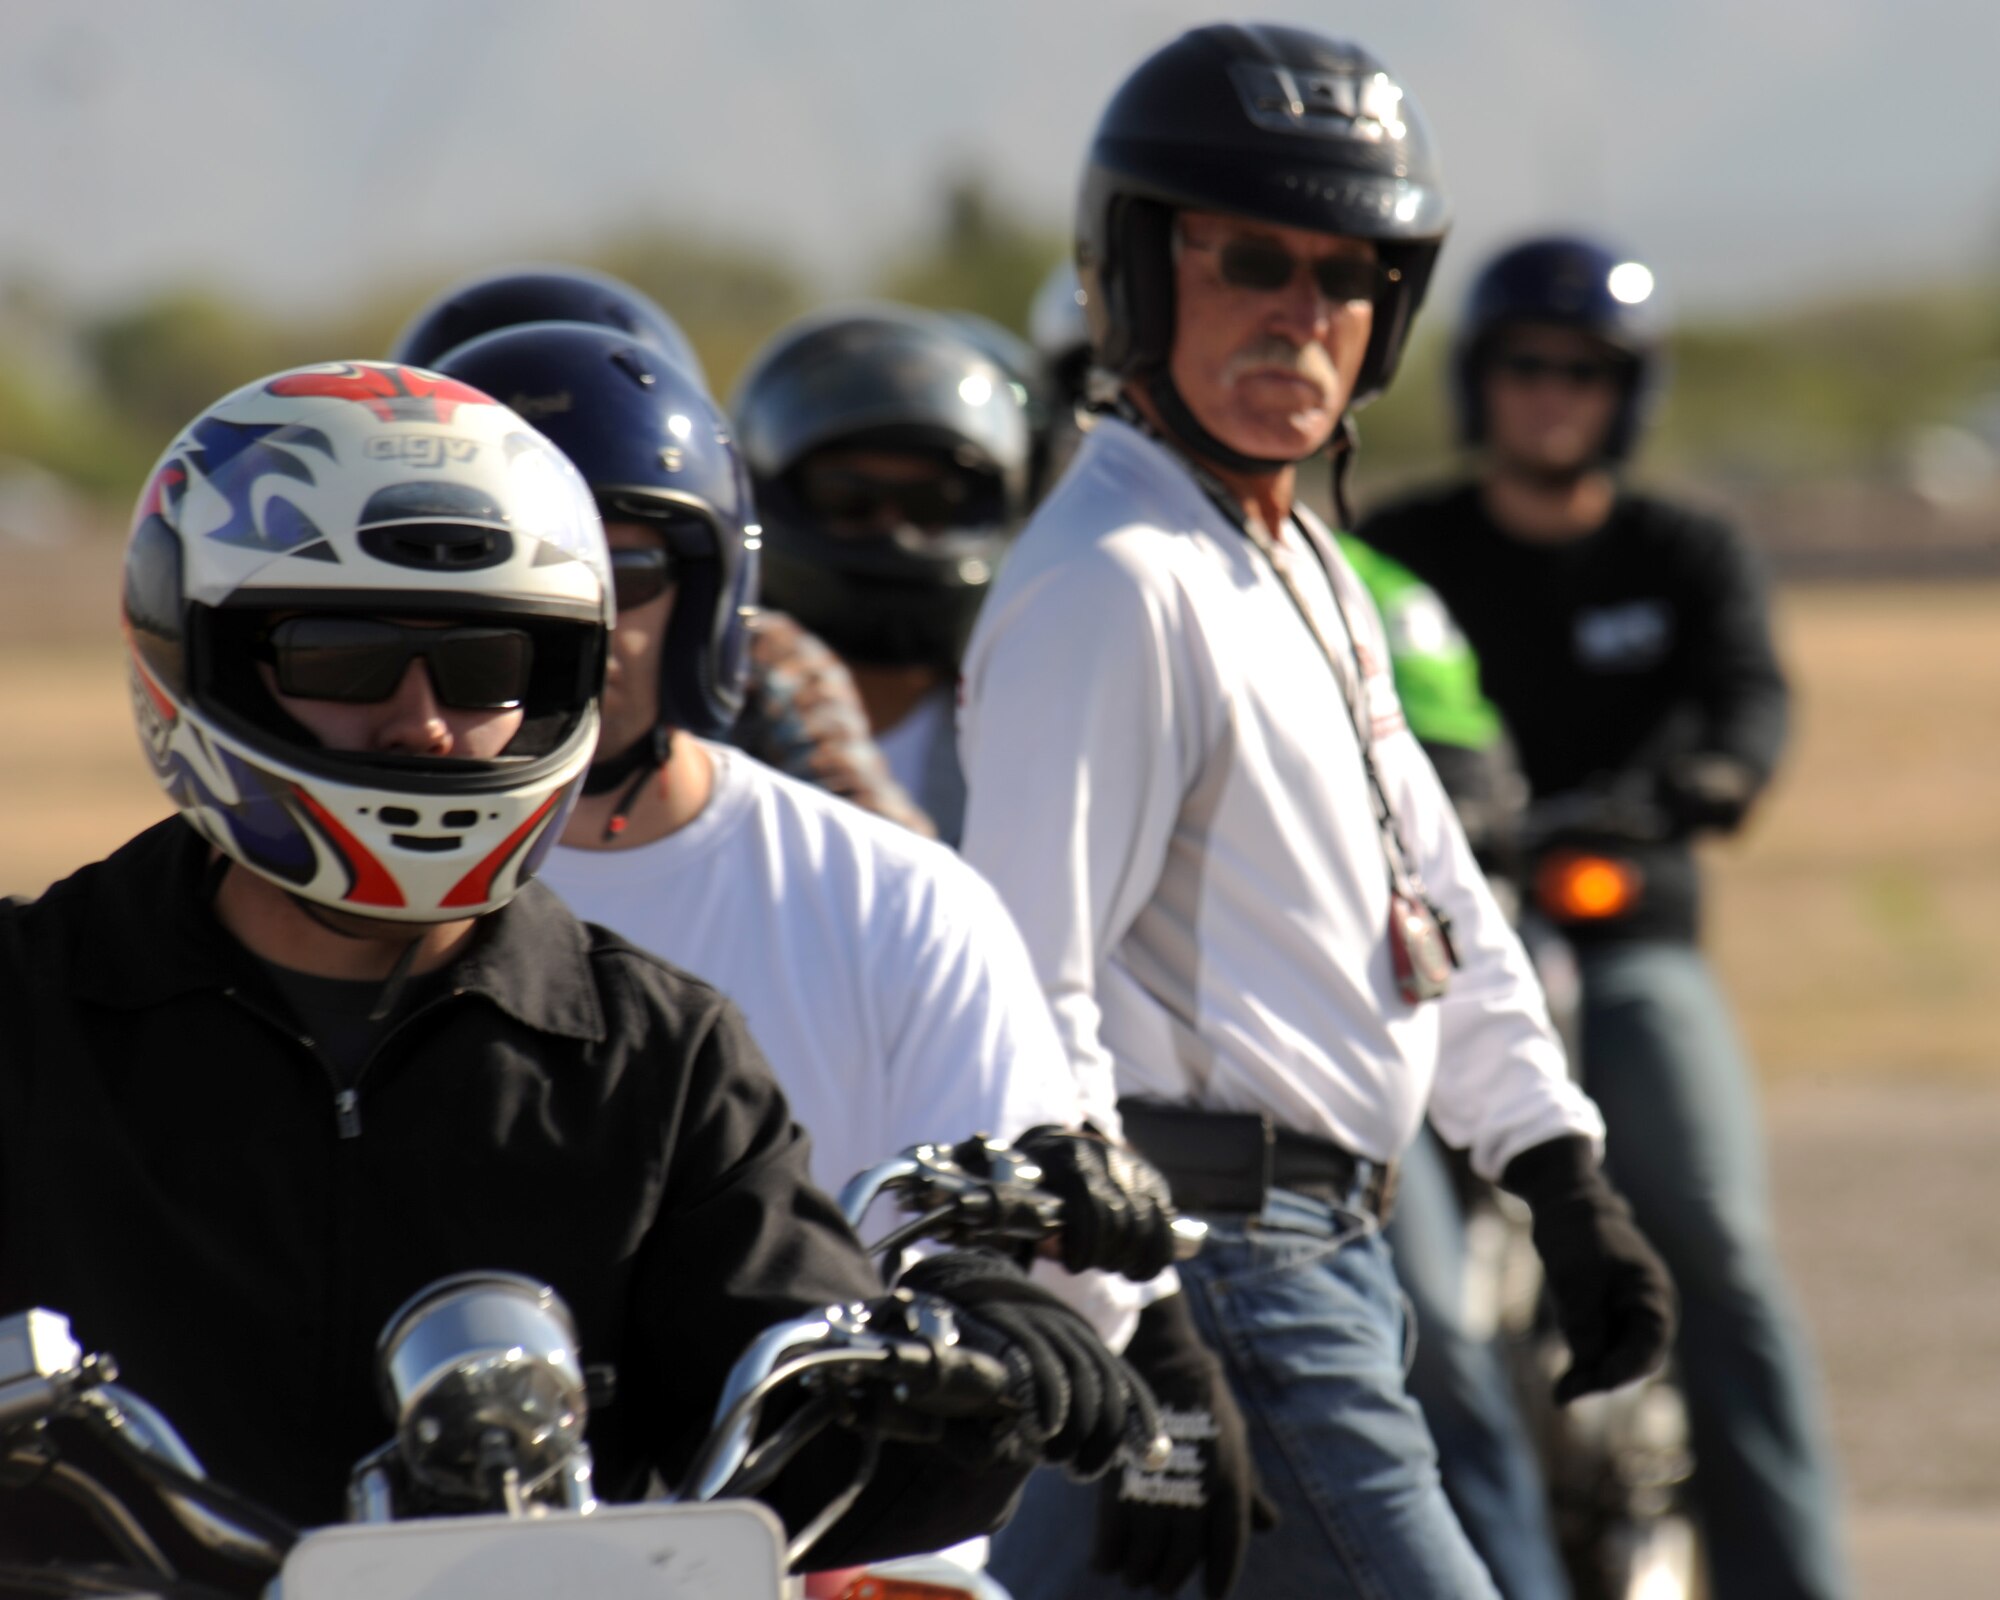 Students of the Motorcycle Safety Basic Rider Course wait in line as Chris Life, motorcycle safety instructor, walks to get in place to monitor the riders on Davis-Monthan Air Force Base, Ariz., May 8, 2012. The course is taught in several locations in Ariz. The D-M location is specifically for military members, their dependants, and civilian Department of Defense employees. (U.S. Air Force photo by Airman 1st Class Timothy D. Moore/Released)